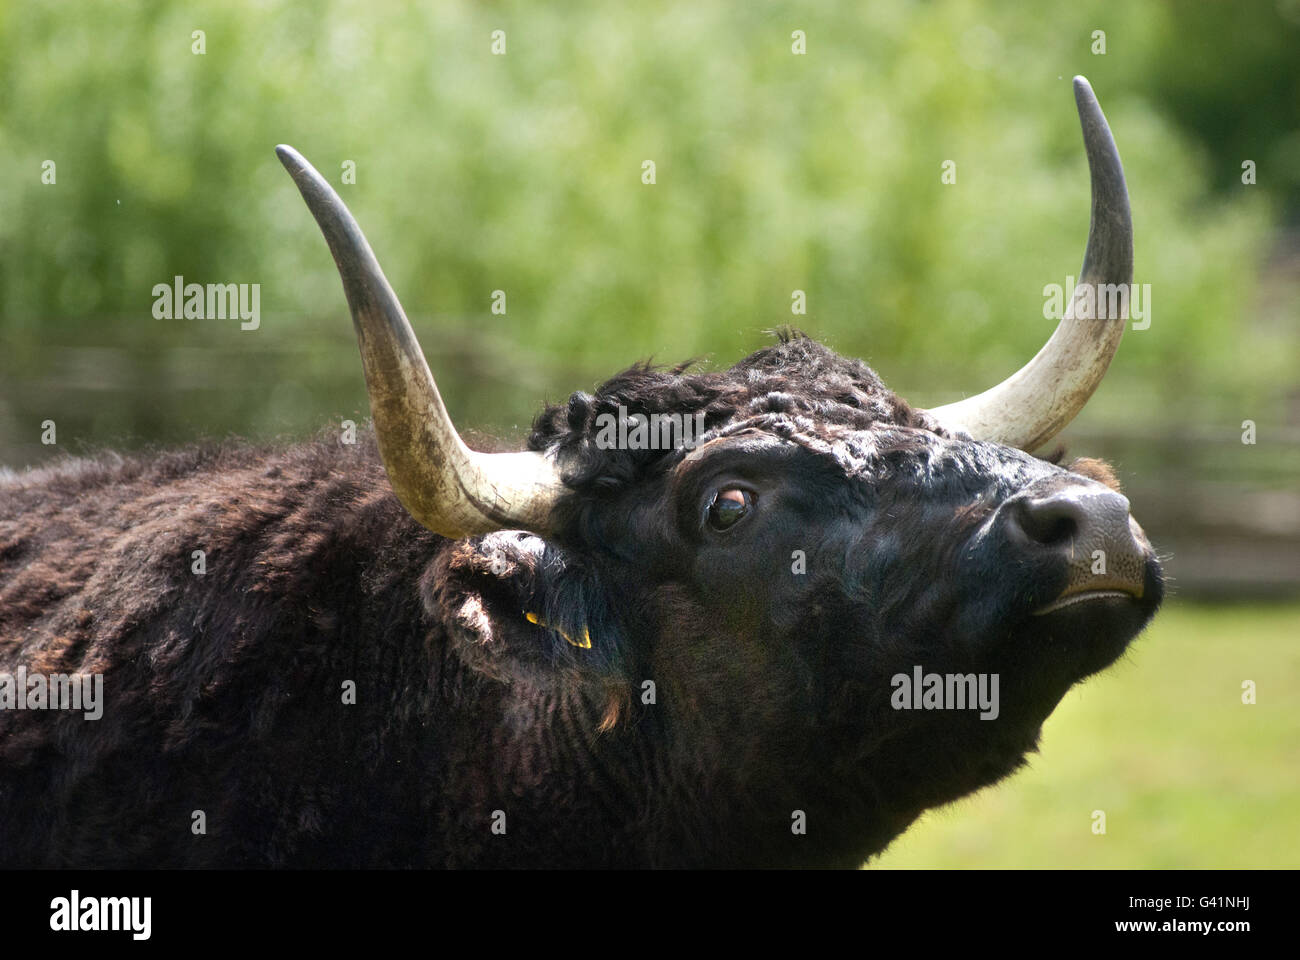 Black Dexter cow at Bede's World Stock Photo